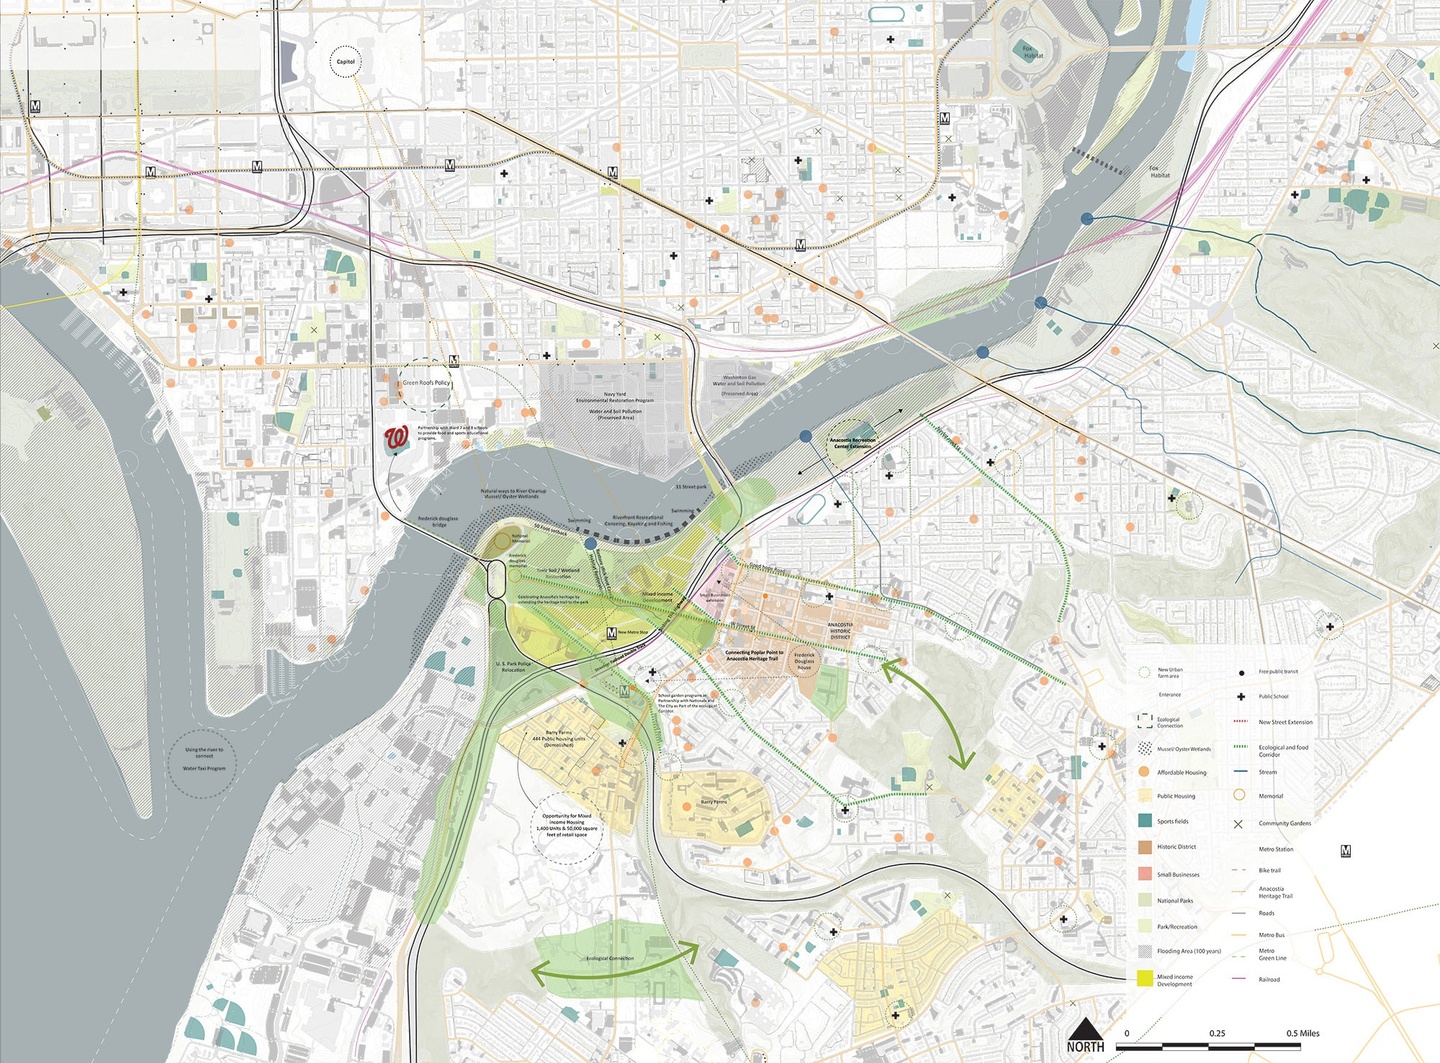 Map of Poplar Point in Washington DC depicting types of areas and transport lines